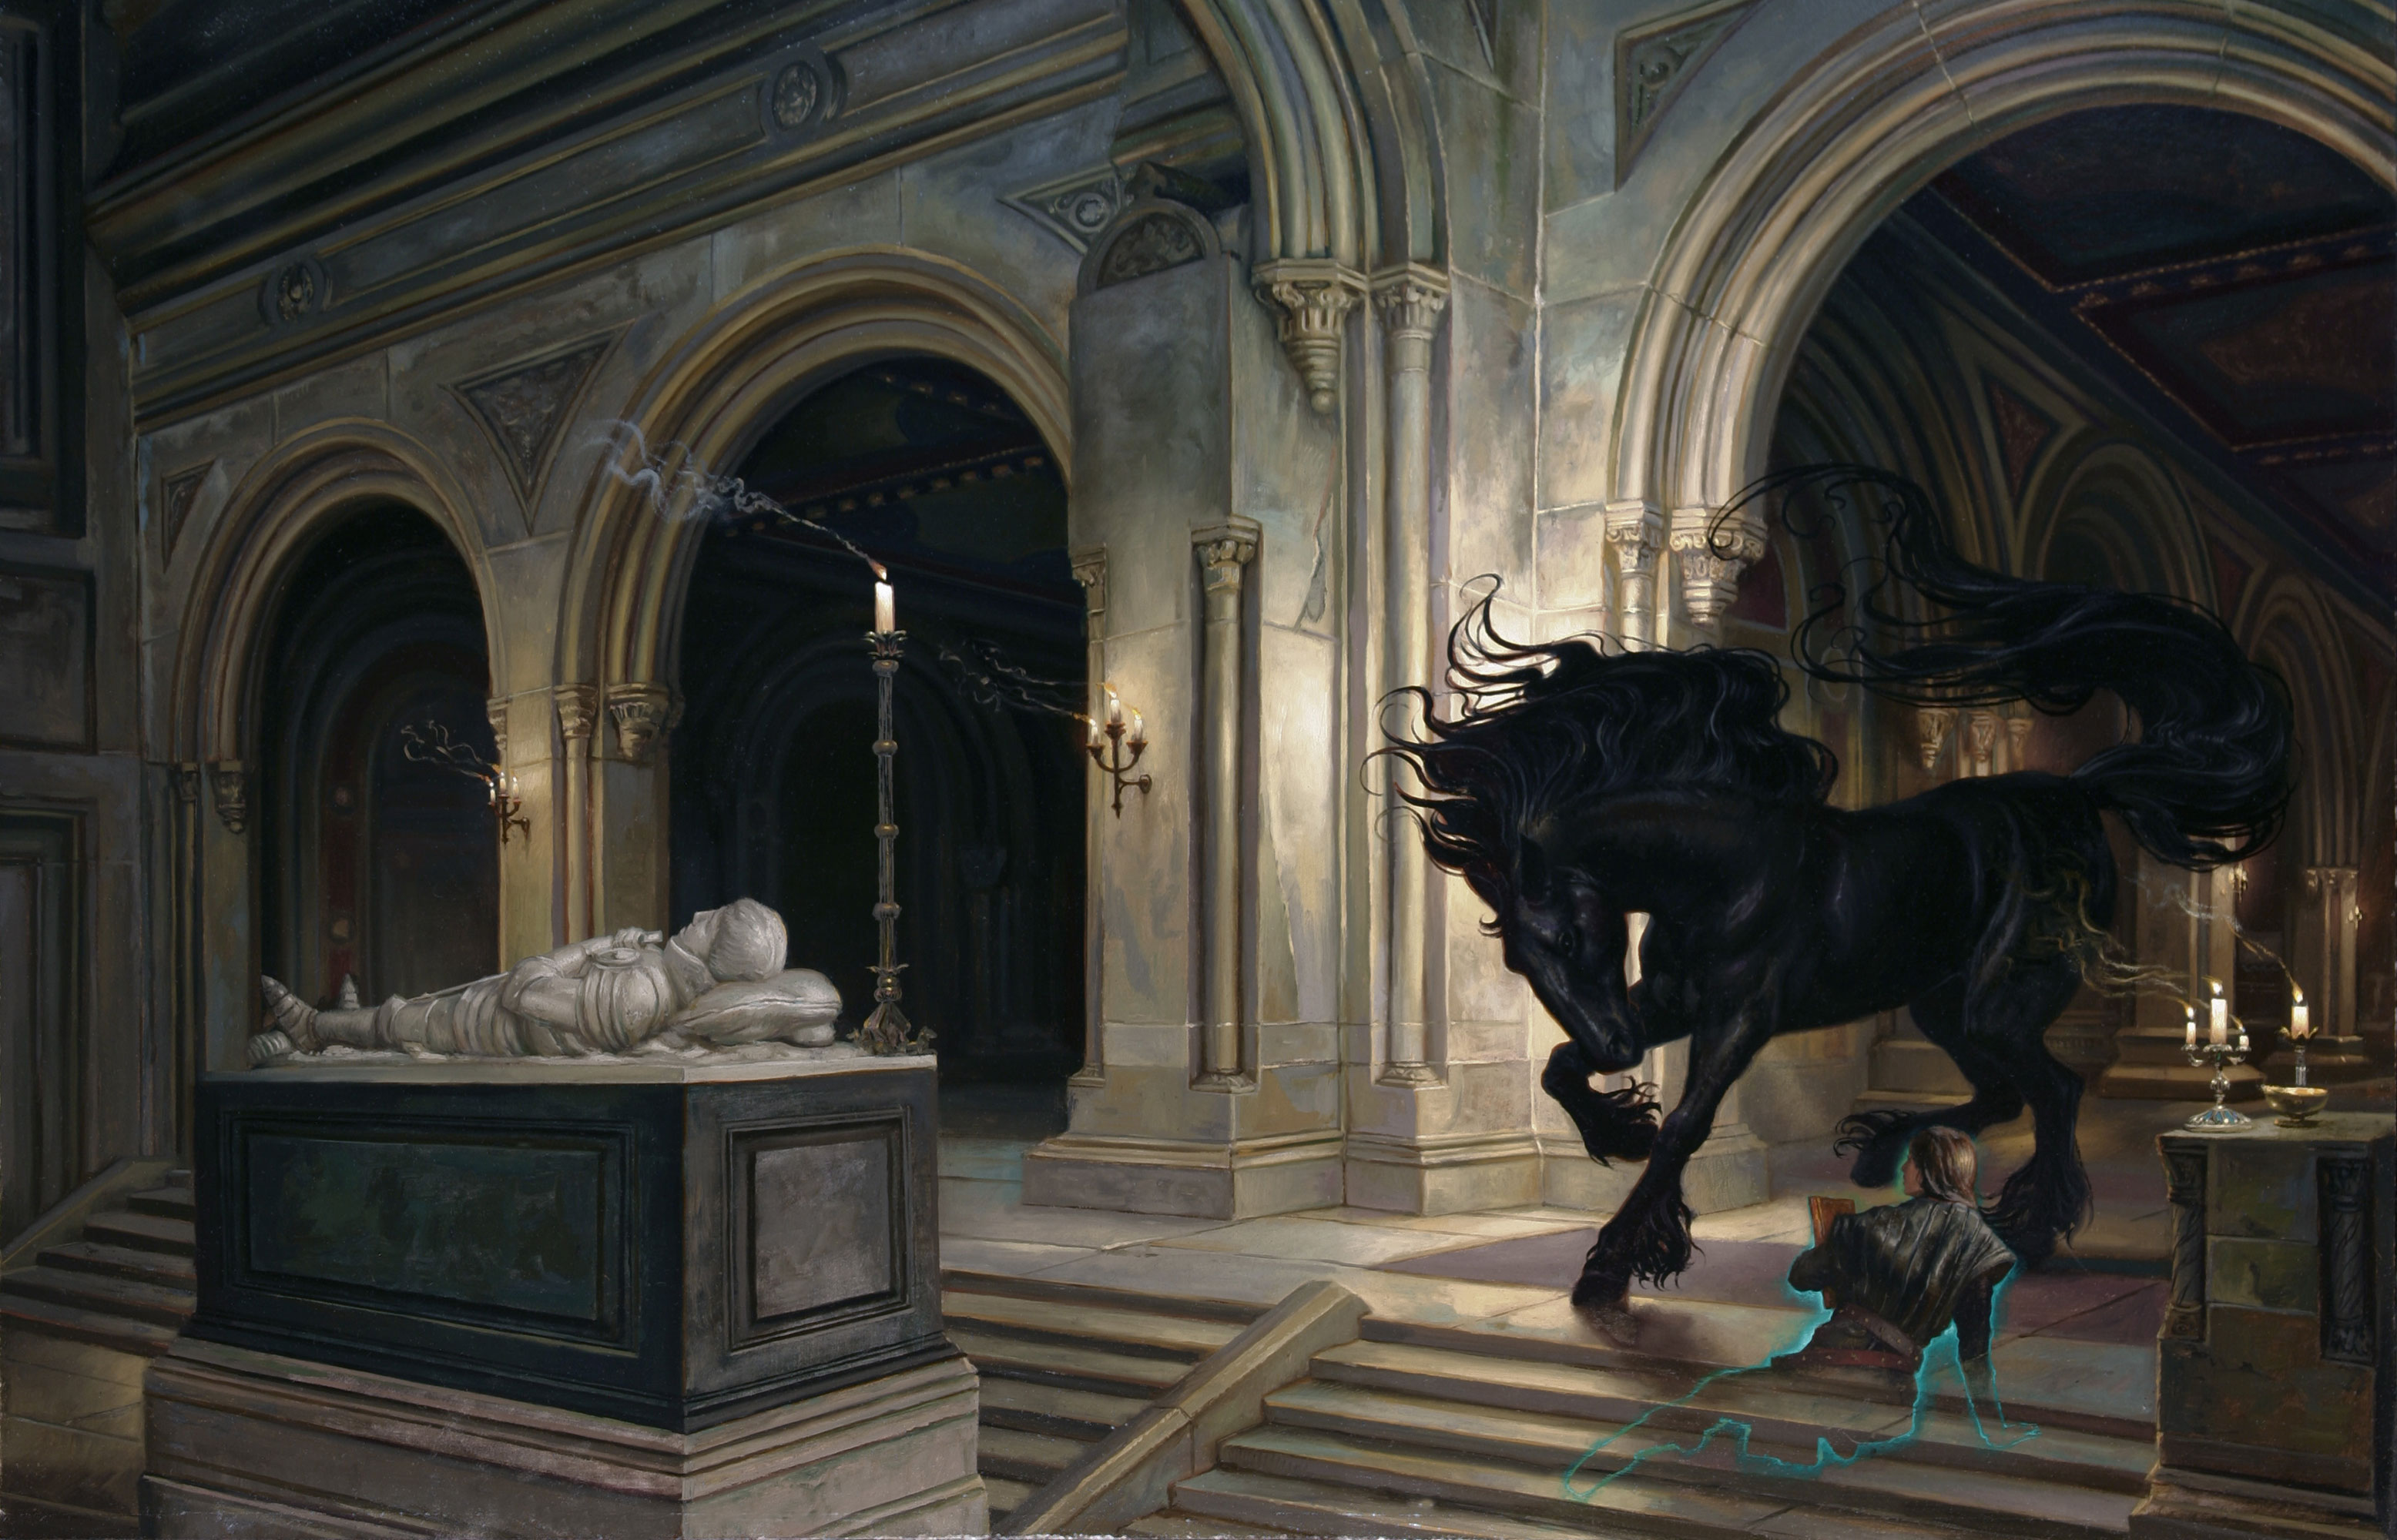 High King's Tomb
Cover for the novel by Kristen Britain
27" x 41"  Oil on Panel 2007
collection of the author
prints available in the store